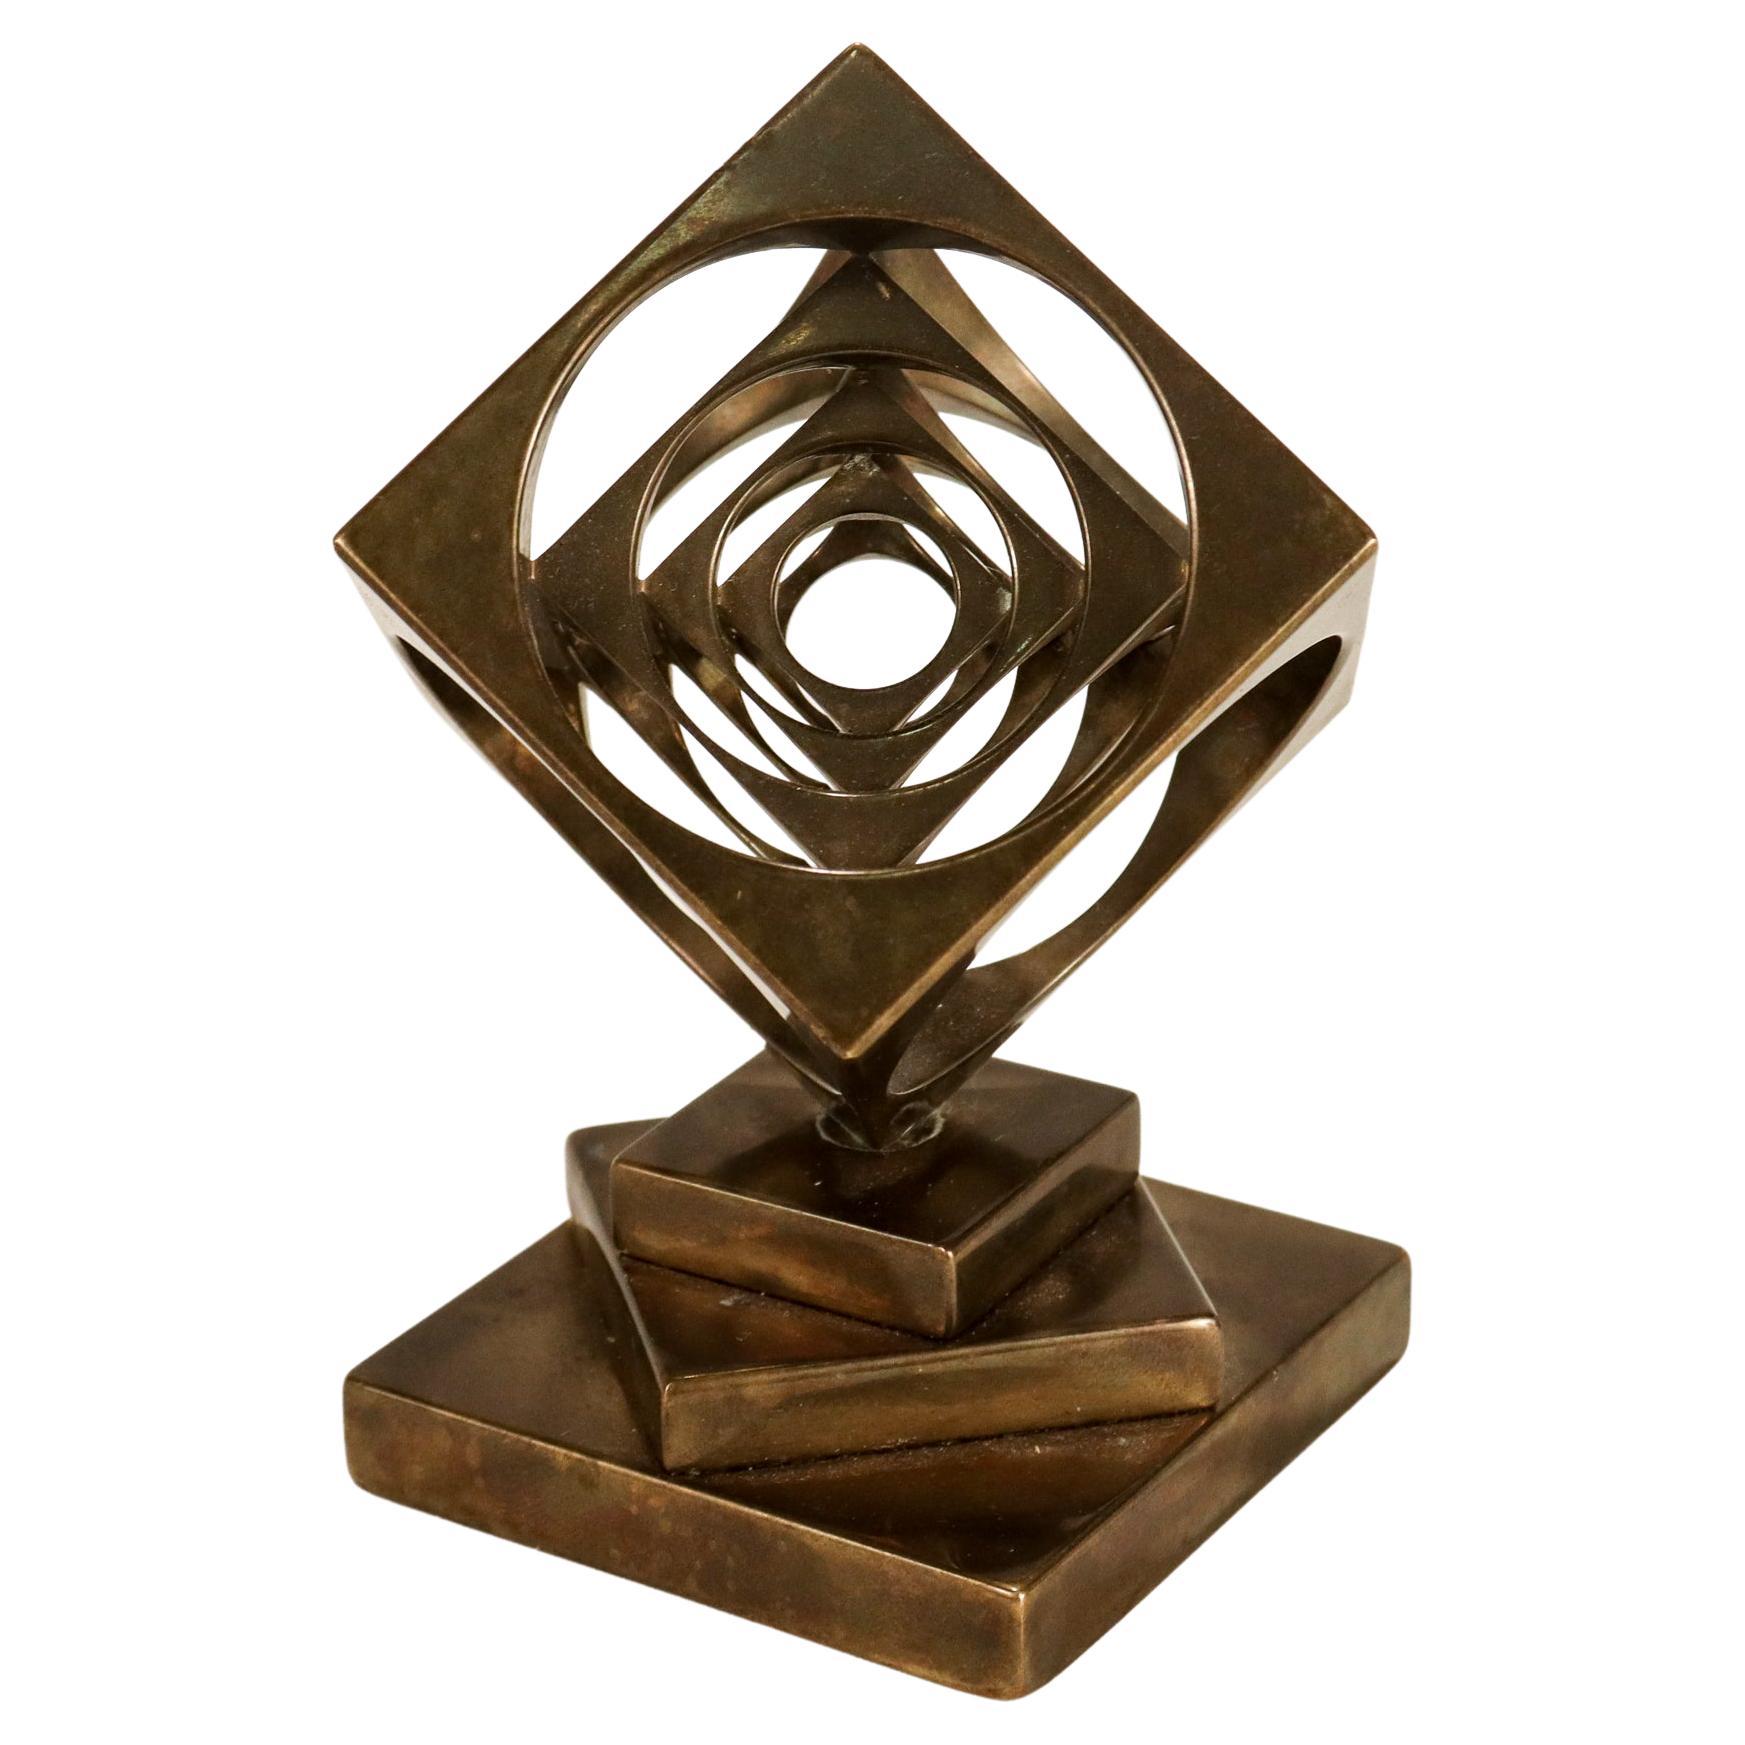 A fine midcentury geometric bronze paperweight for the desk.

In the form of a turner's cube of graduated cubes within cubes.

Mounted on a machined plinth of graduated squares.

Secured to the plinth with a steel screw.

Simply a wonderful